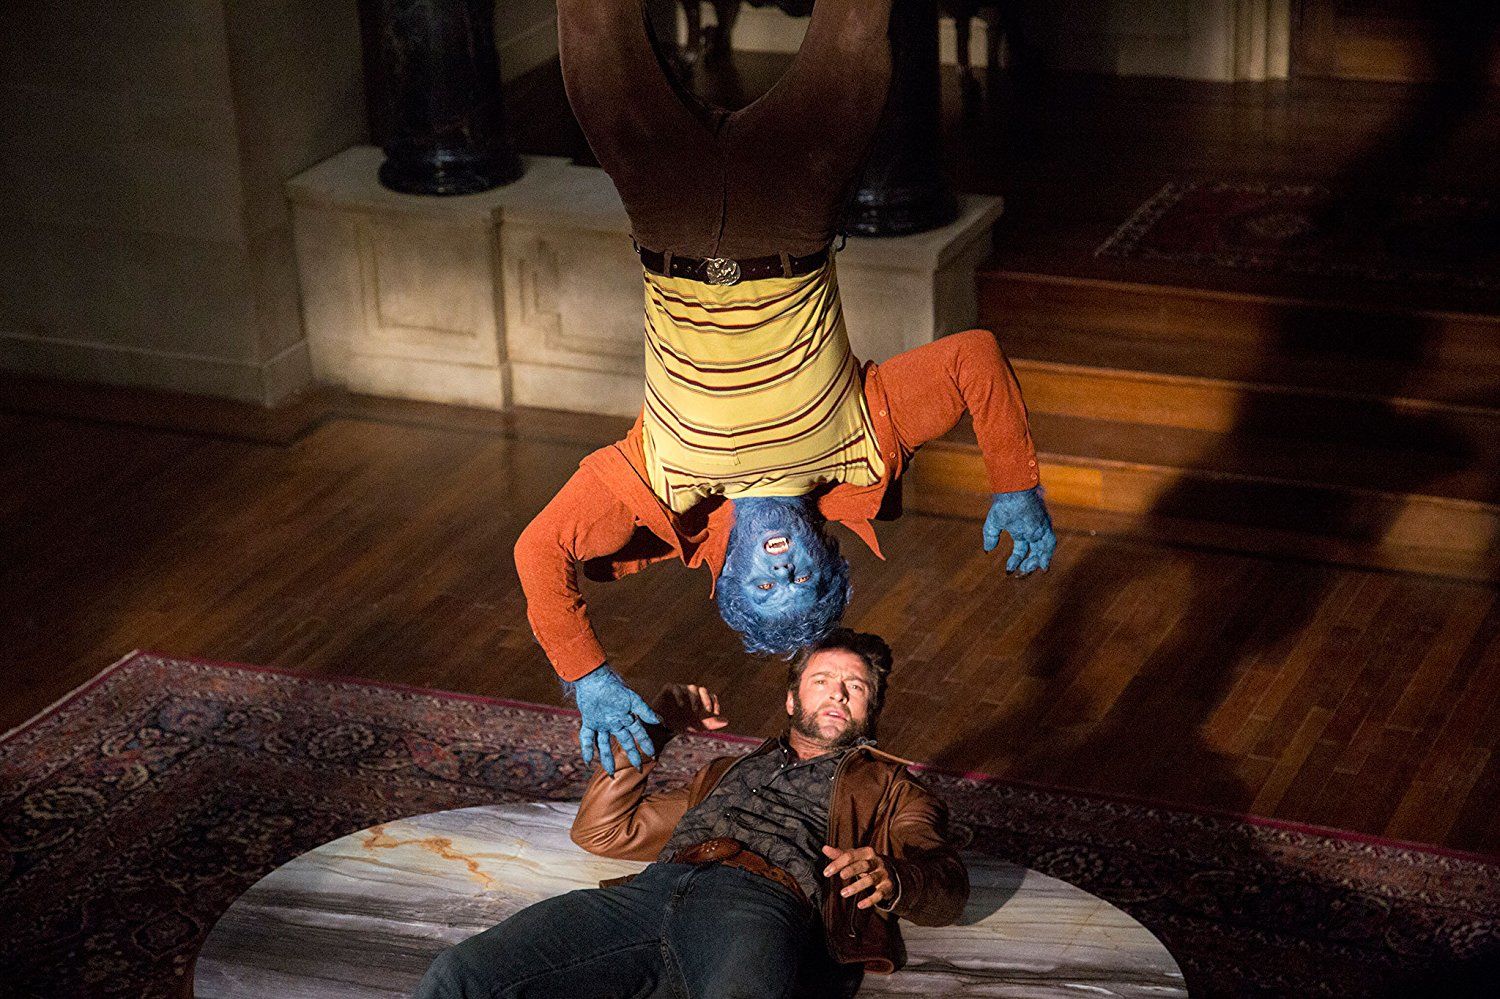 Hank and Logan in X-Men Days of Future Past